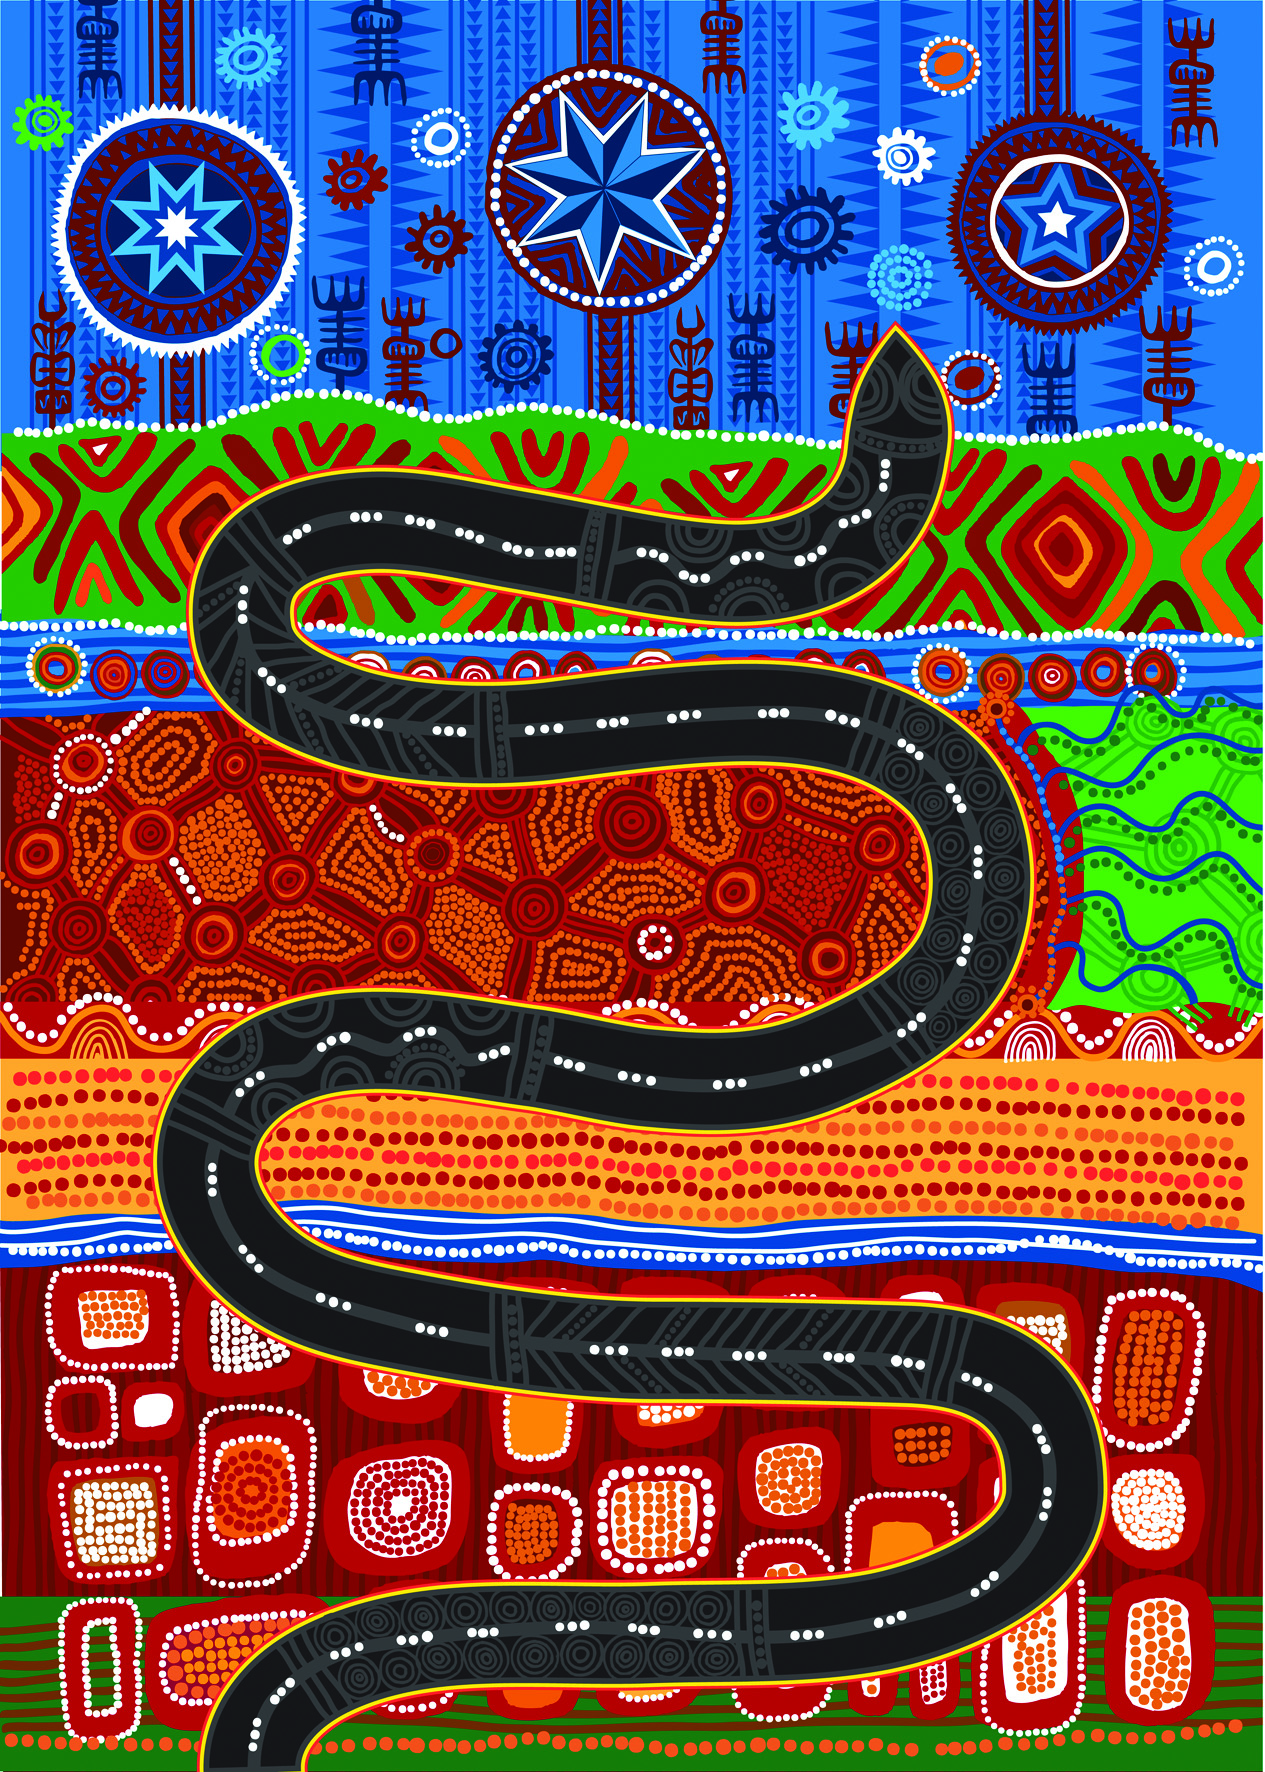 The artwork’s journey begins at the bottom, with the Rainbow Serpent slowly meandering its way northwards, creating and forming the land. The bold red rectangular motifs represent the built-up urban cityscape of South-East Queensland. The bright golden dotted strip indicates our beautiful coastline and magnificent beaches. Moving out west over the Great Dividing Range and into dry, arid country, before being engulfed by the rainforest region of Cape York. The serpent’s head is situated at the tip of Queensland, with the blue colour representing the pristine waters of the Torres Strait Islands.